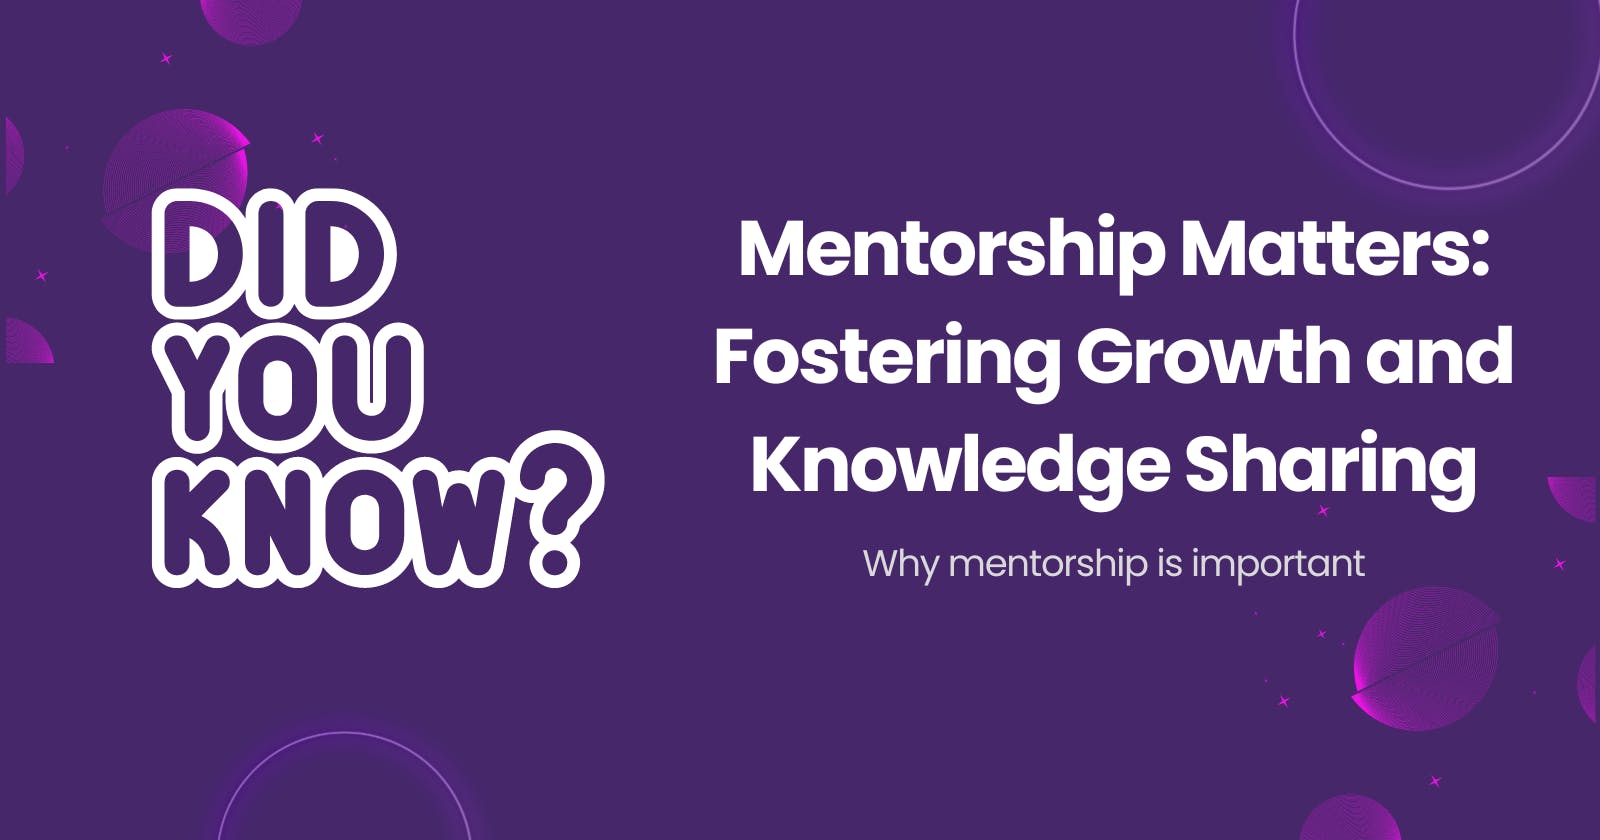 Mentorship Matters: Fostering Growth and Knowledge Sharing